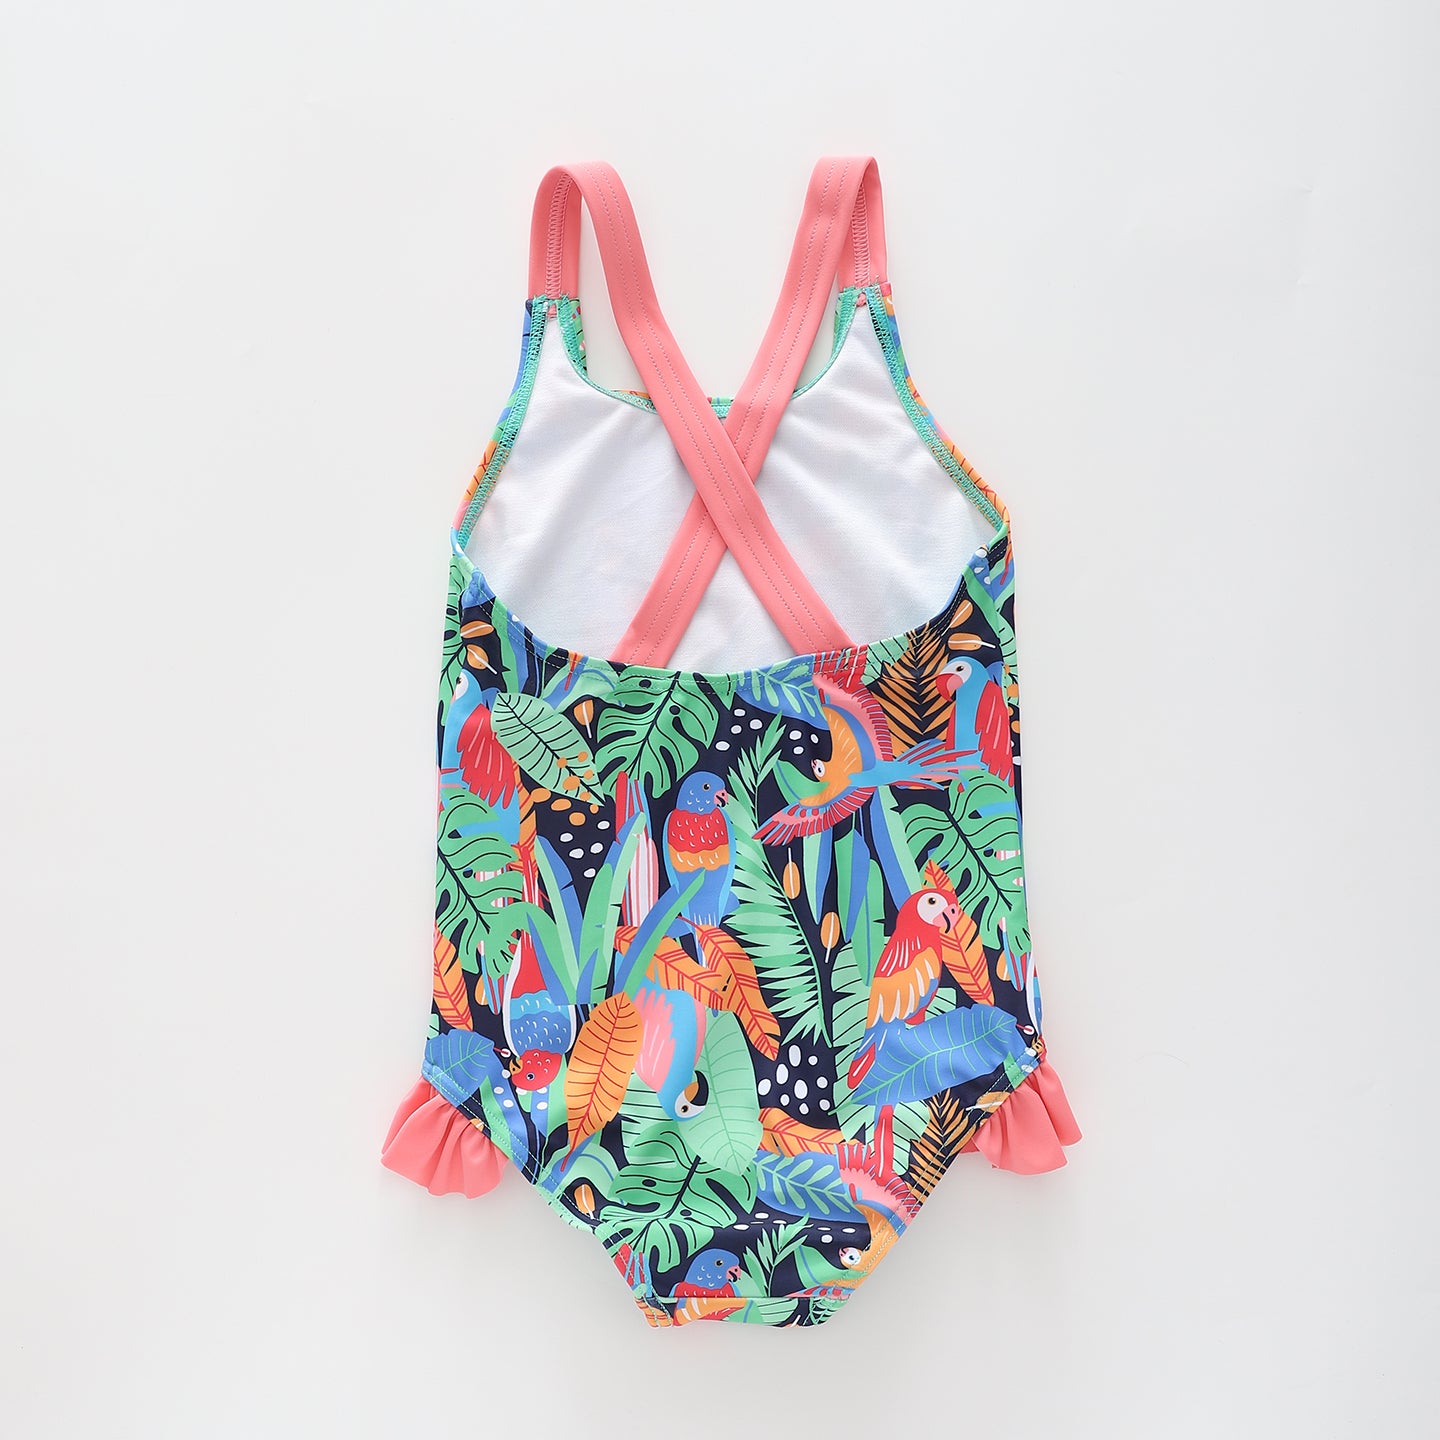 Girl's Jungle Print Pink and Green One-piece Swimsuit